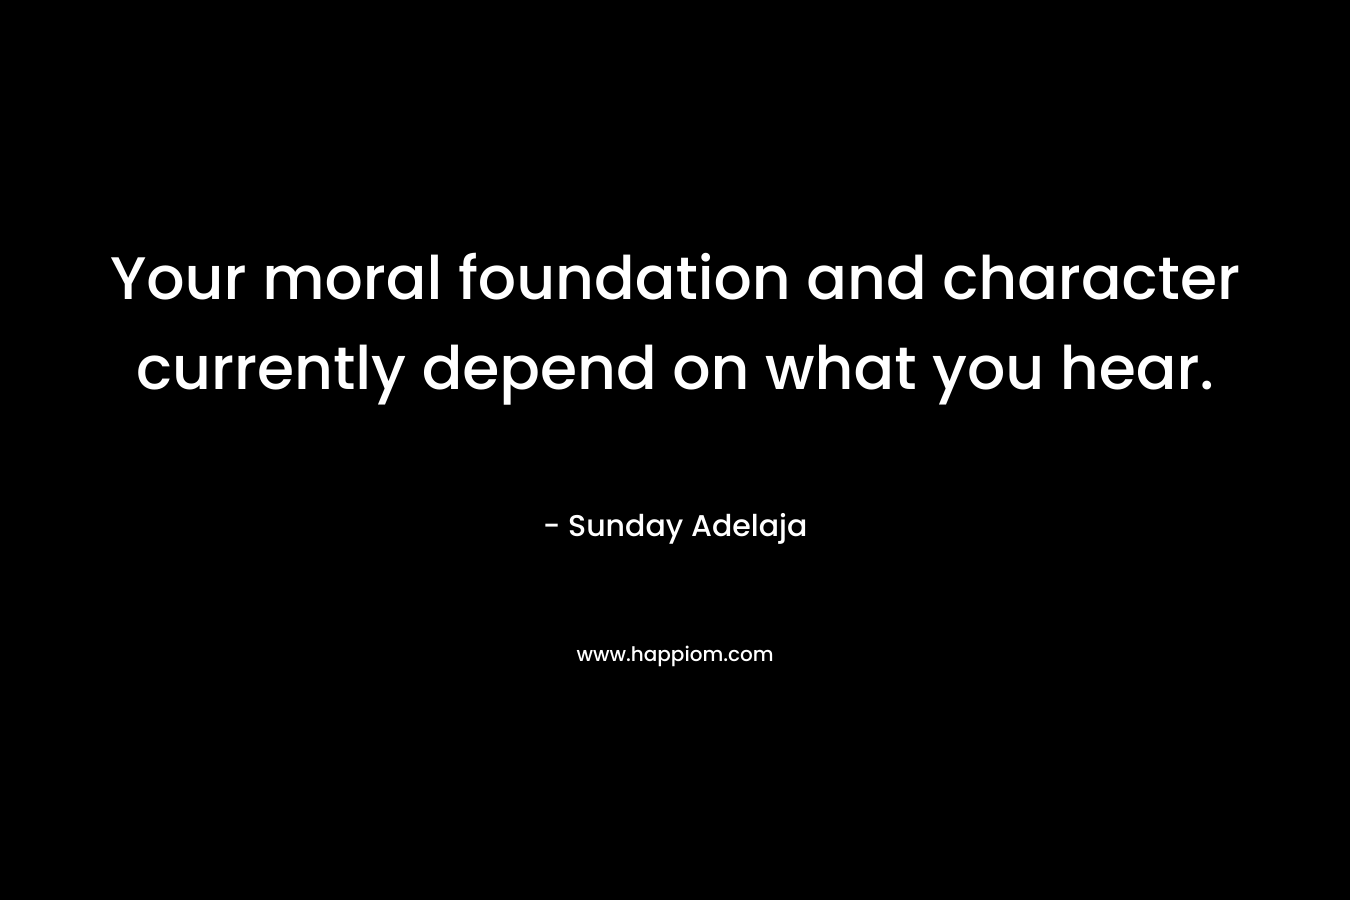 Your moral foundation and character currently depend on what you hear.